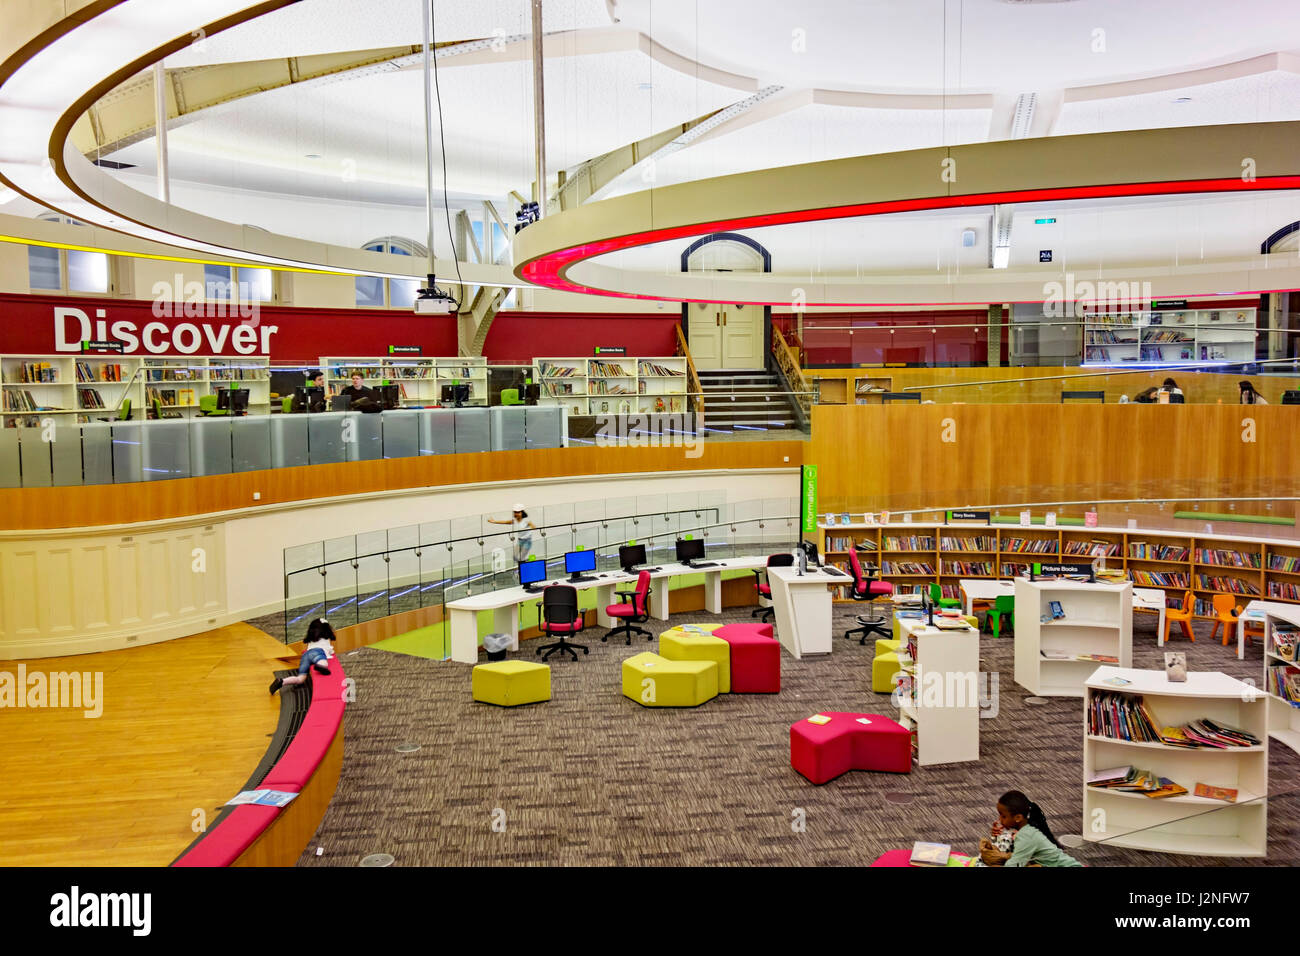 The Discover children's area in Liverpool Central Library, Liverpool, Merseyside, England. Stock Photo